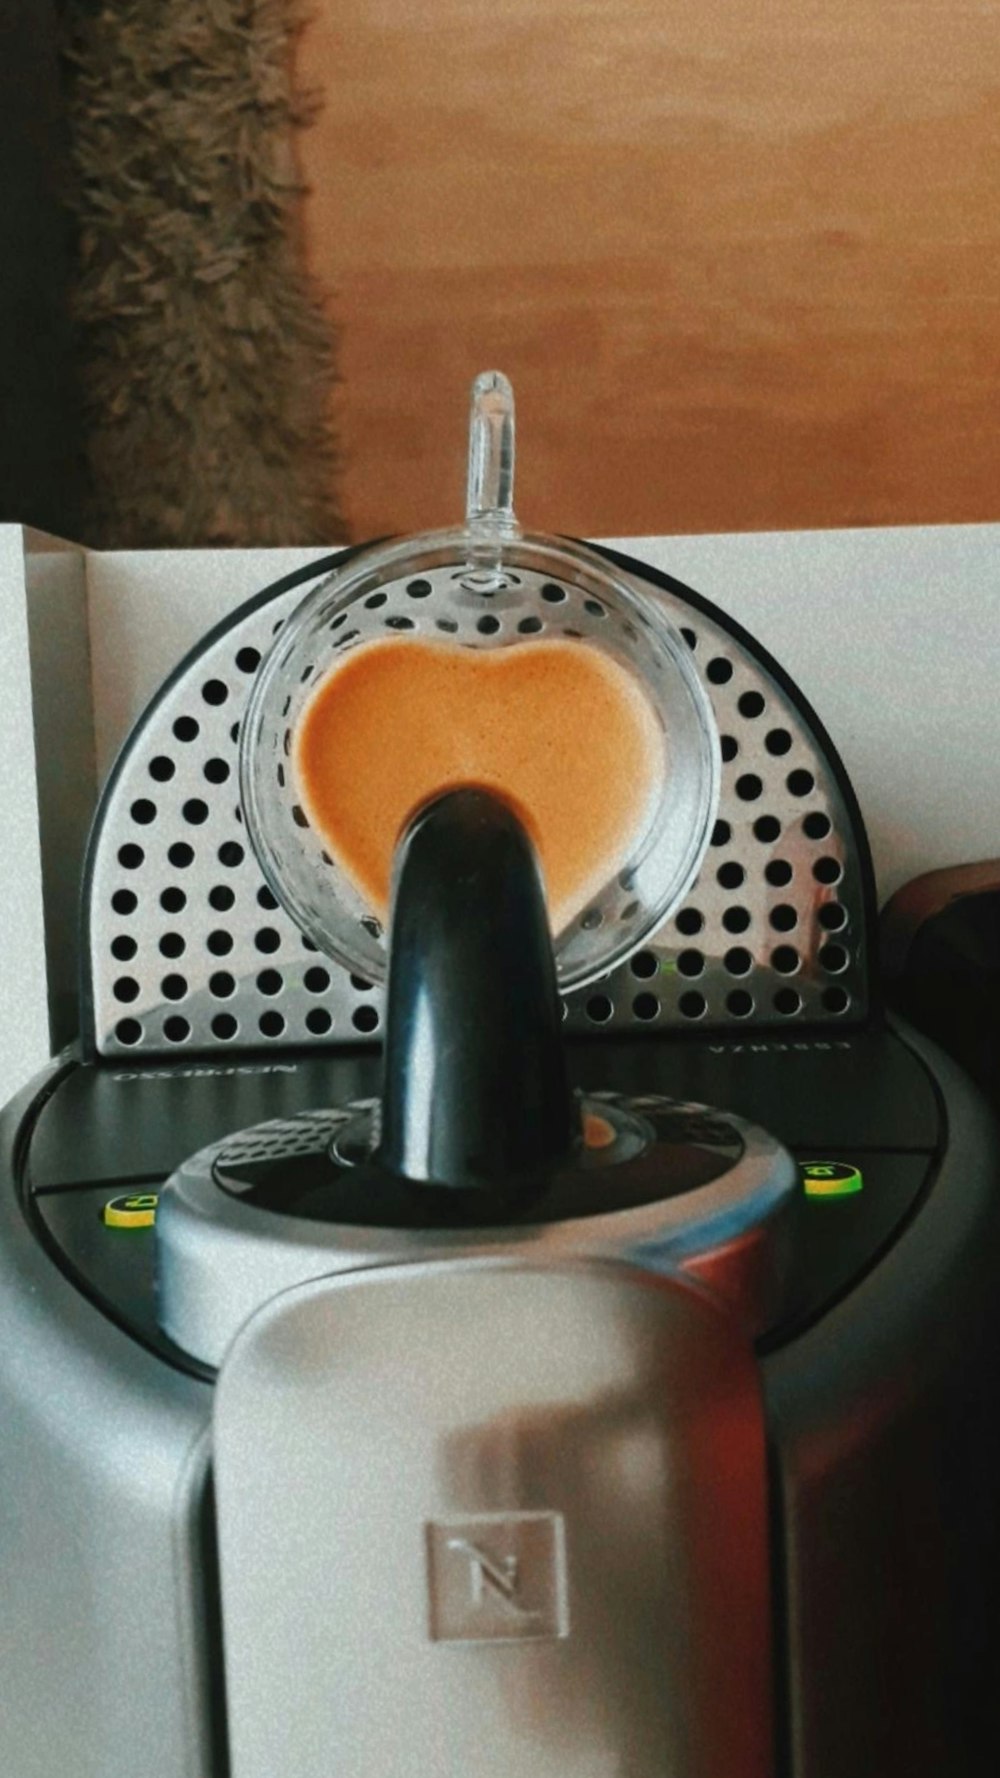 a close up of a juicer on a table